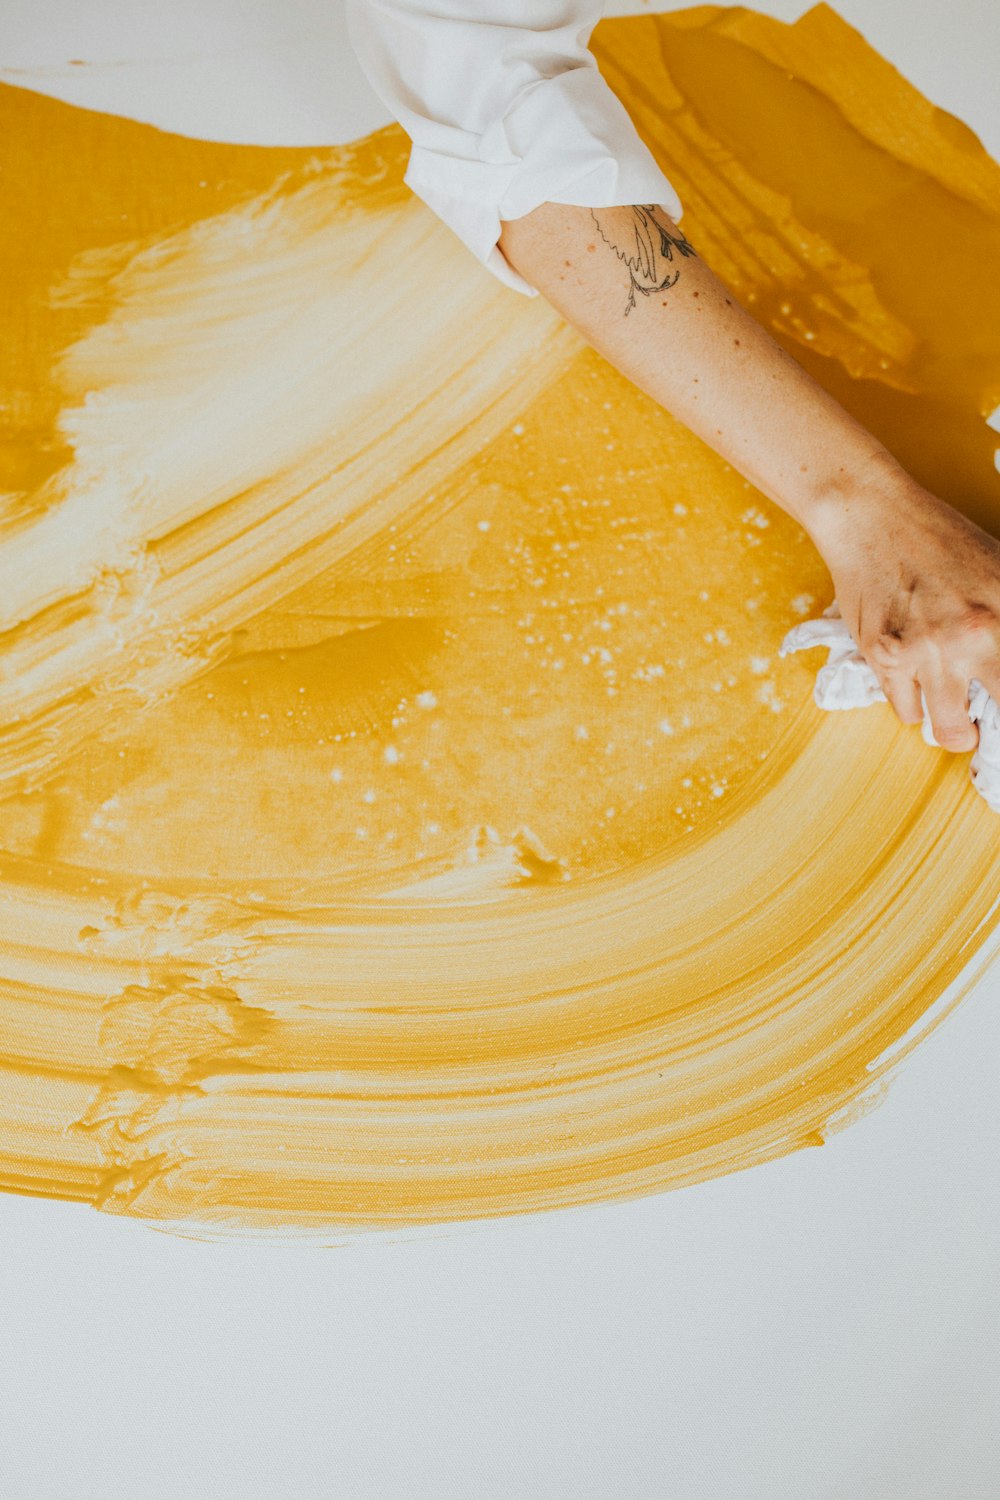 a person is painting a yellow piece of art